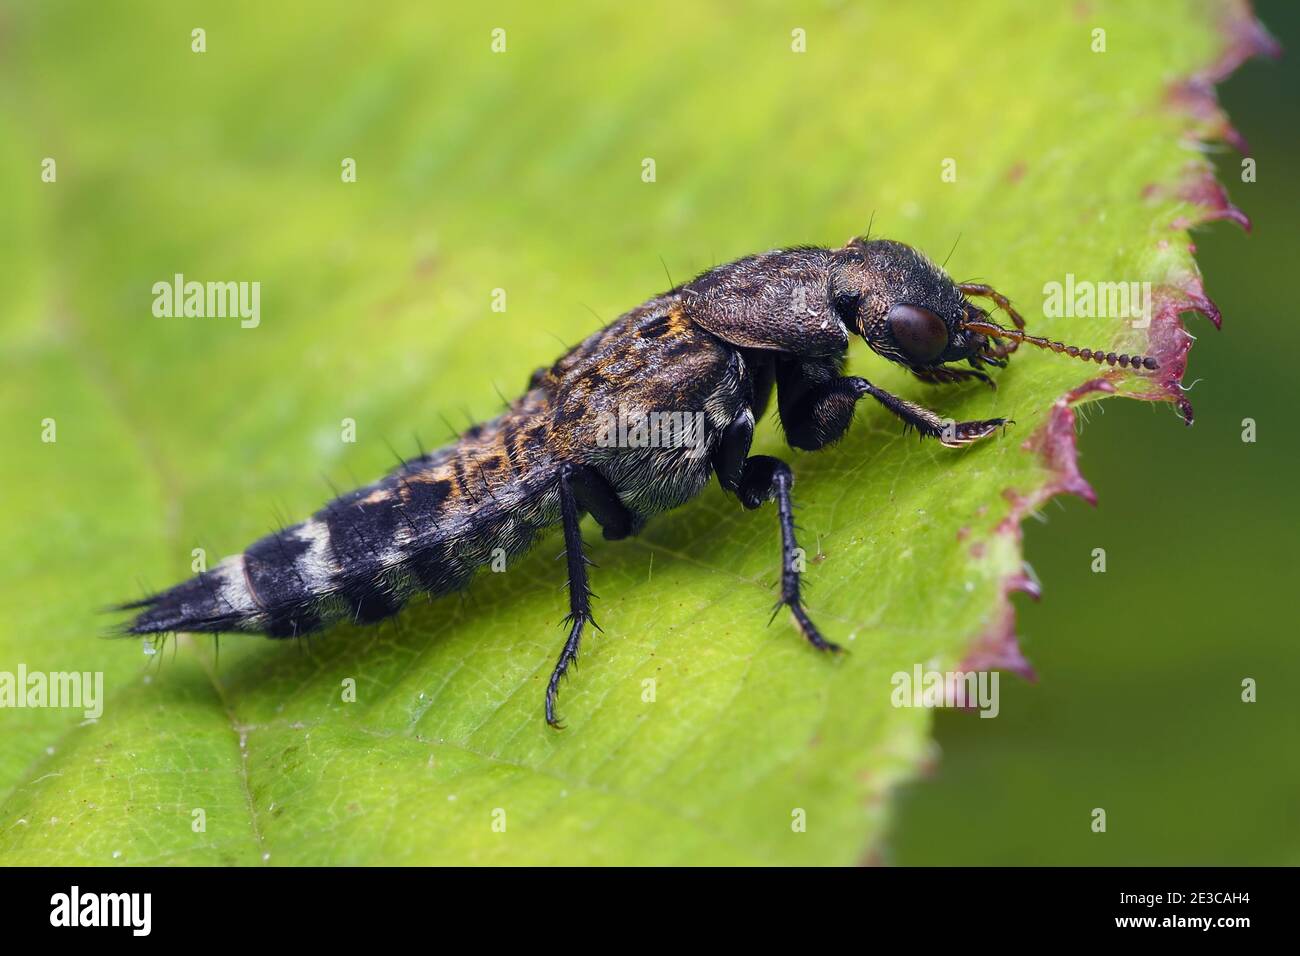 Ontholestes murinus rove beetle at rest on plant leaf. Tipperary, Ireland Stock Photo